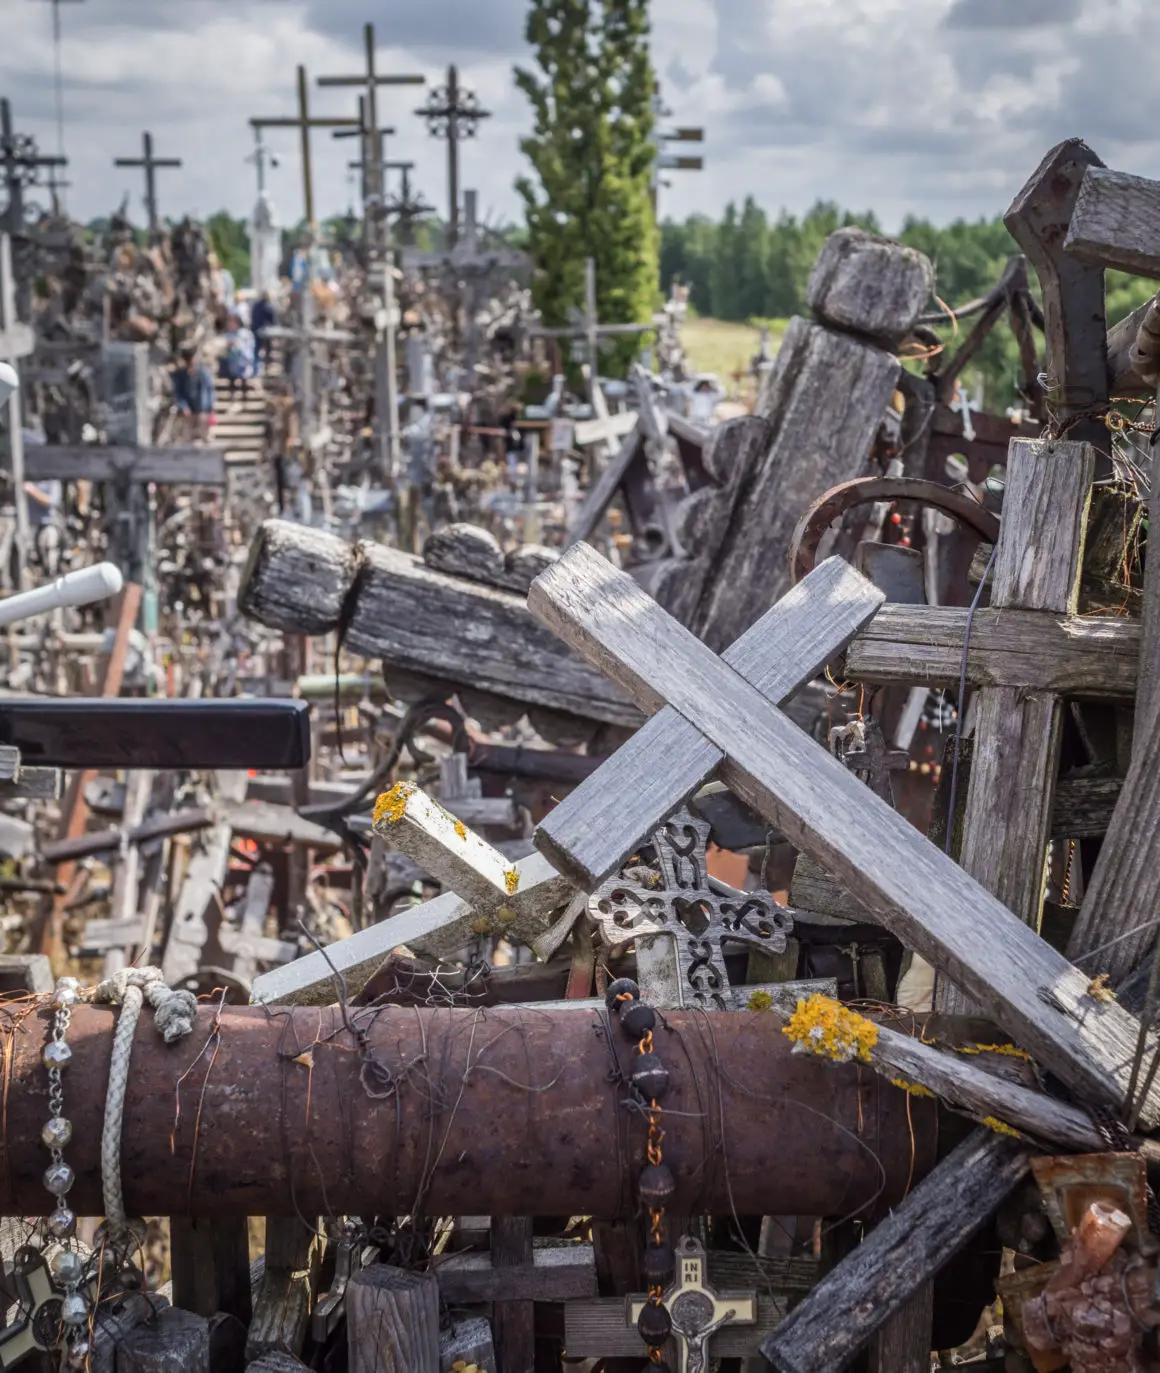 Hill of Crosses in Lithuania on July 22, 2019